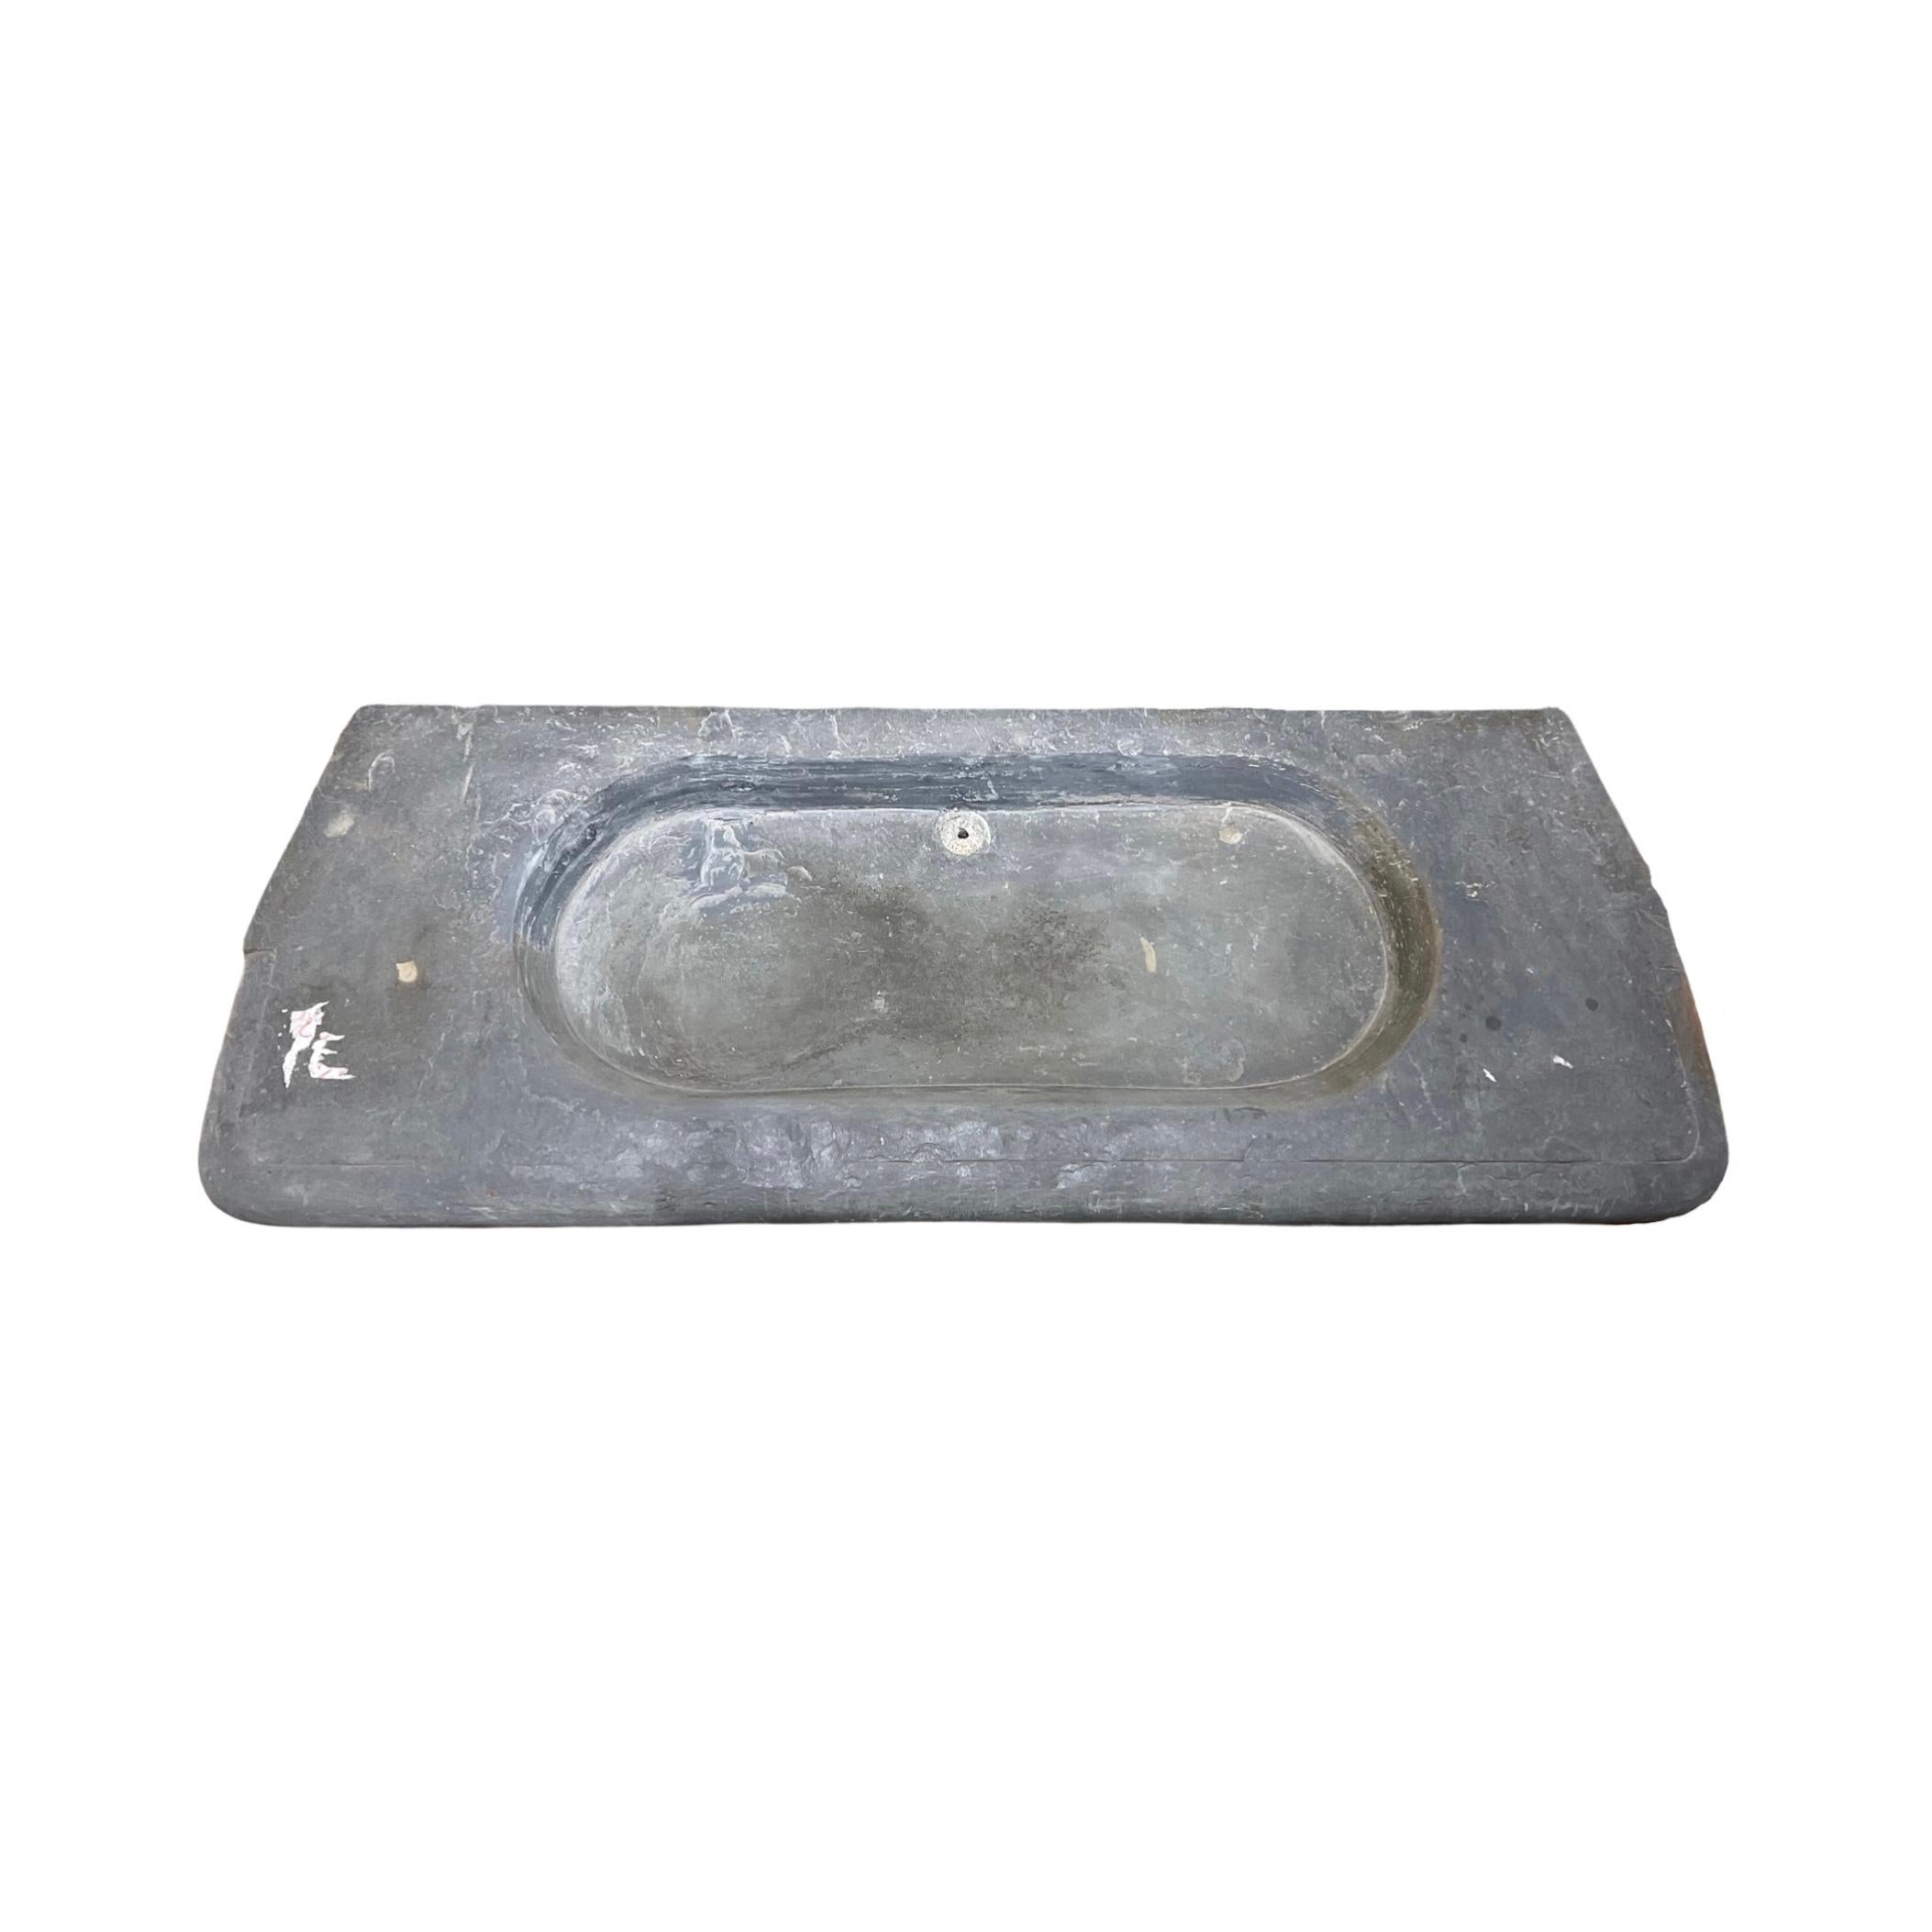 This high-quality Belgium Bluestone Sink is crafted from 17th century bluestone and adds a majestic touch to any bathroom. It comes with a large, rectangular shape and features a classic width style for a timeless feel. Experience the luxury of